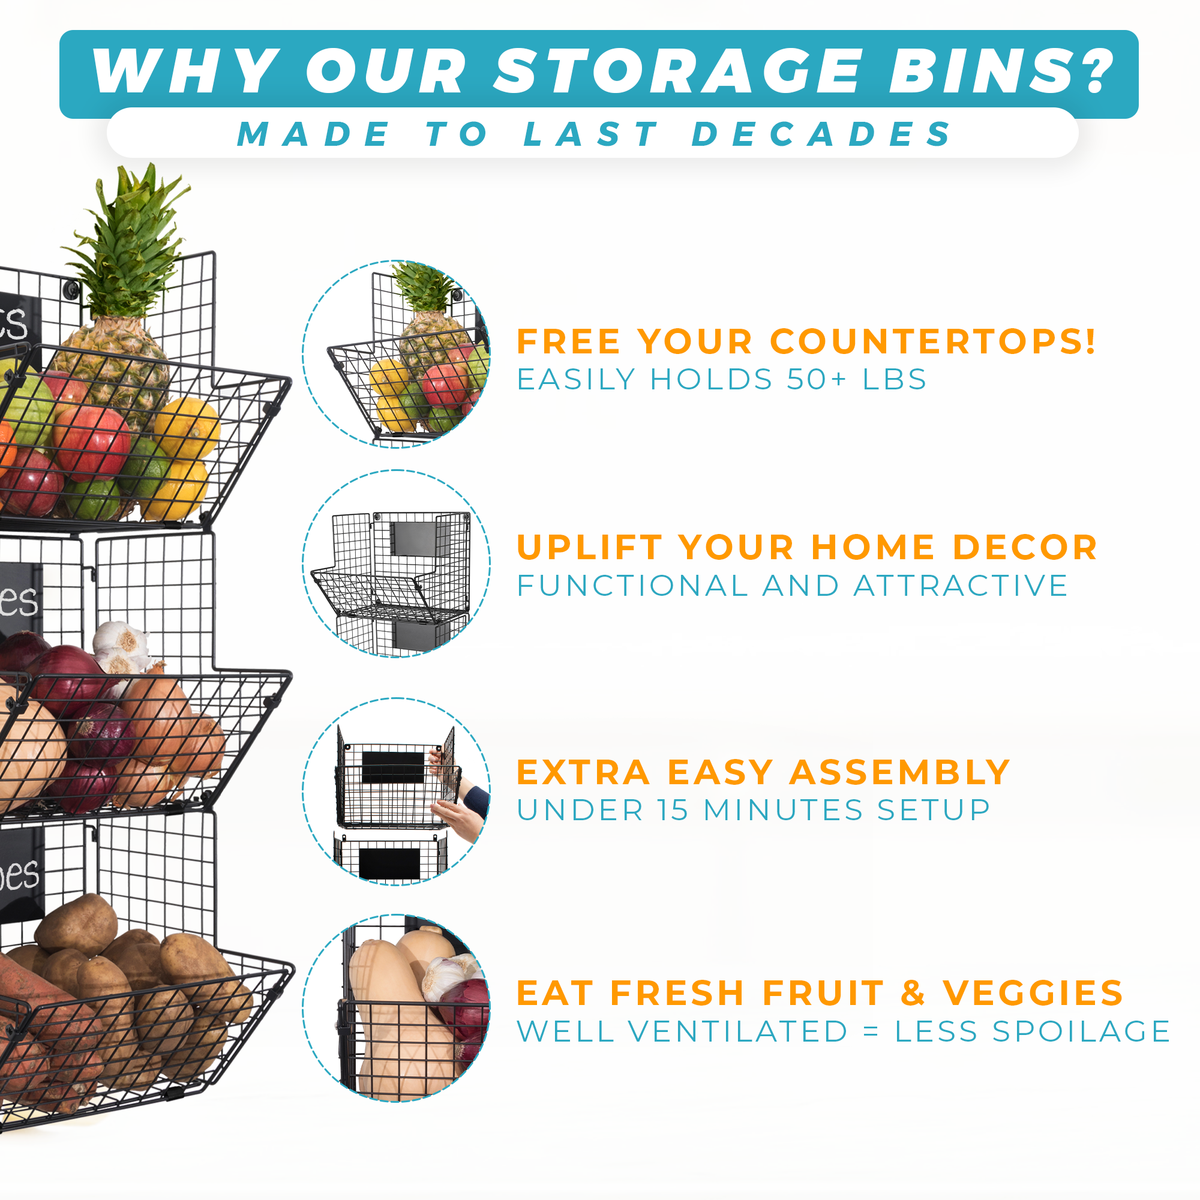 Why Our Storage Bins? Listed product features which is made to last decades